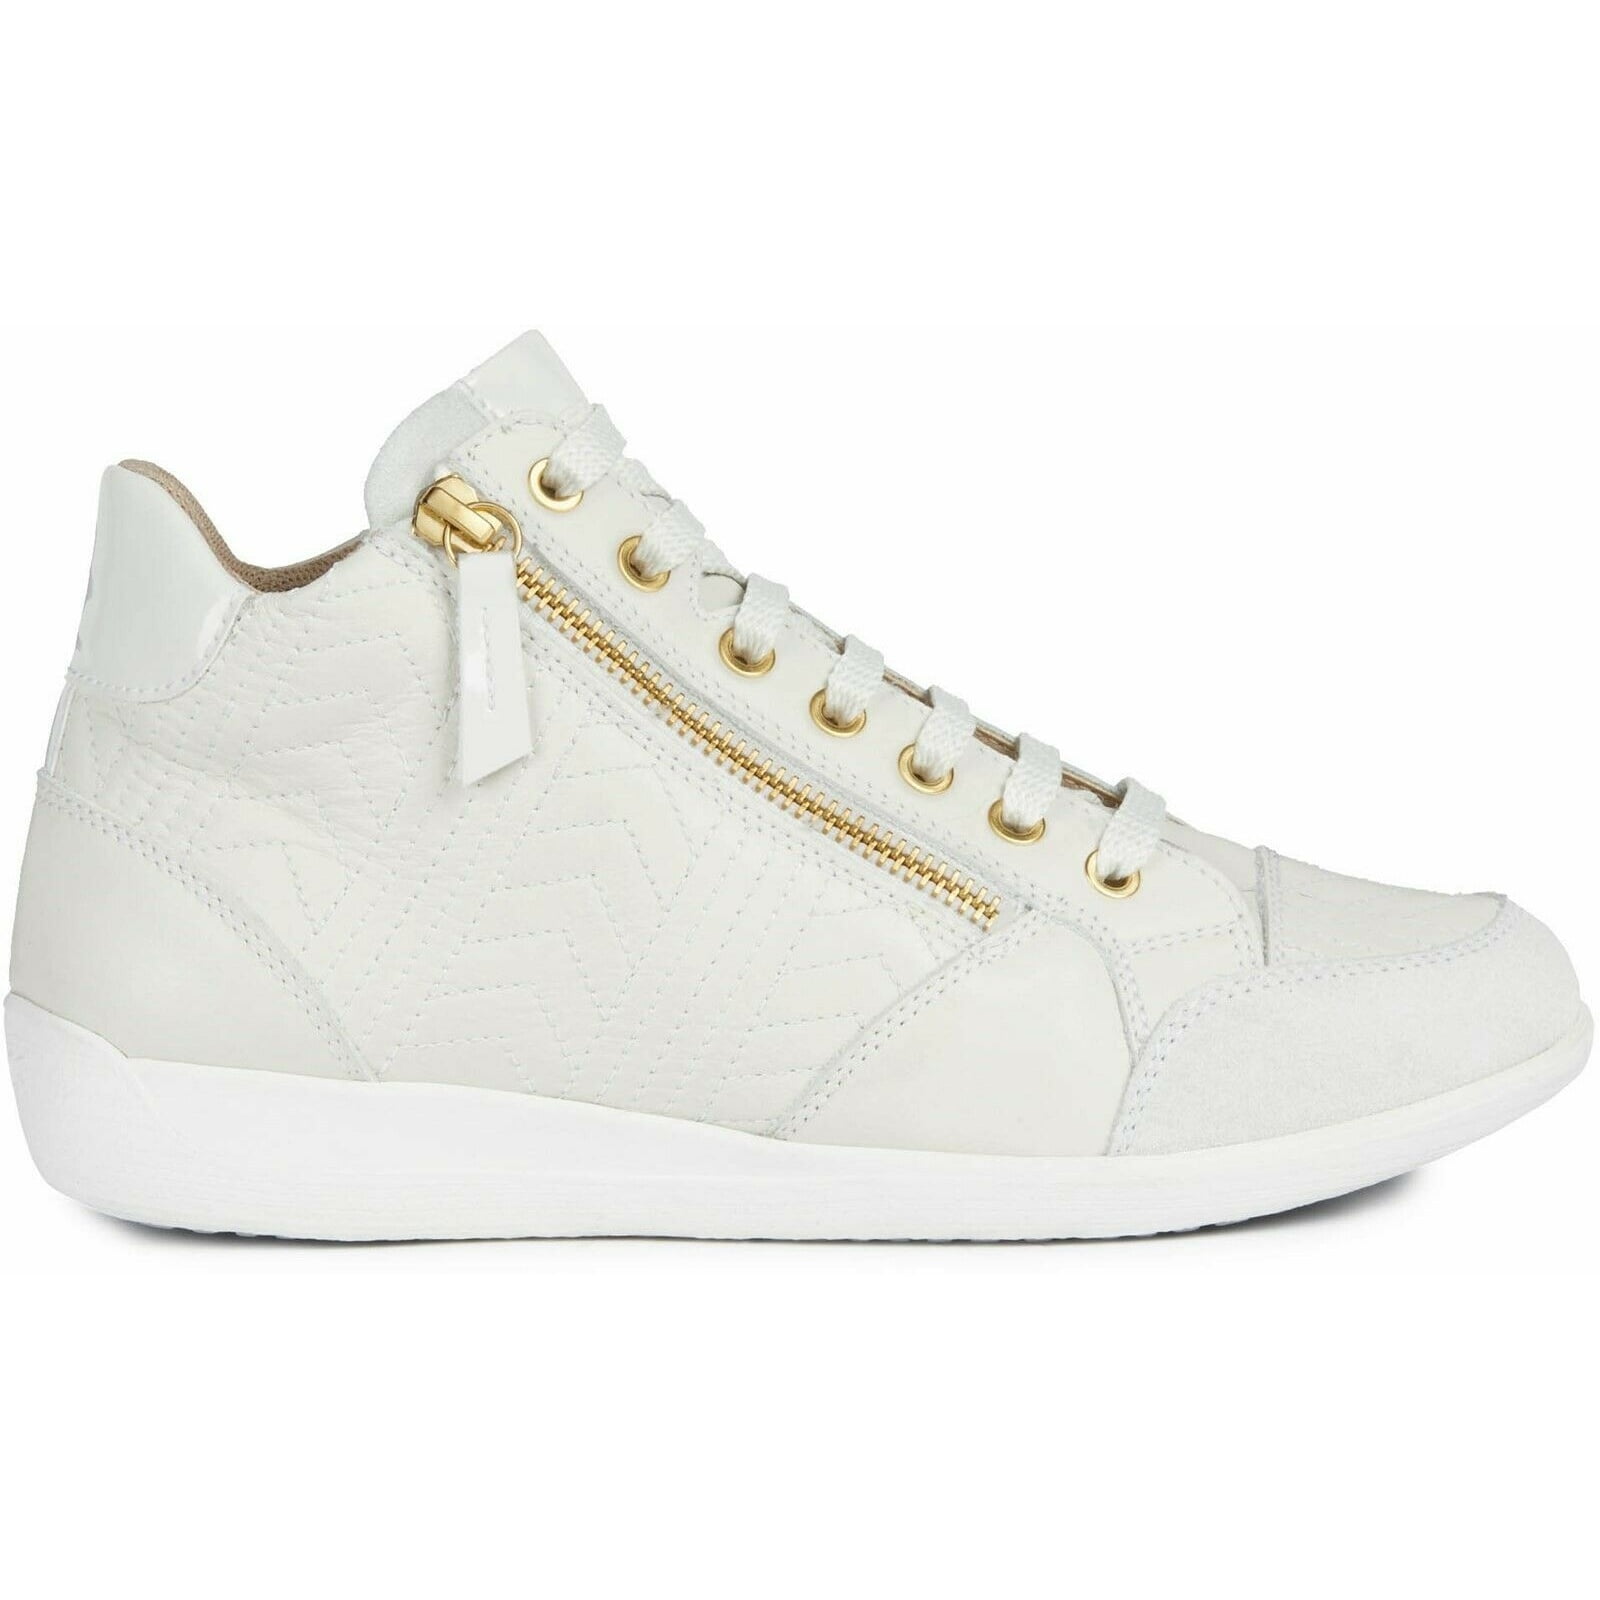 Geox Womens Myria Leather Sneakers